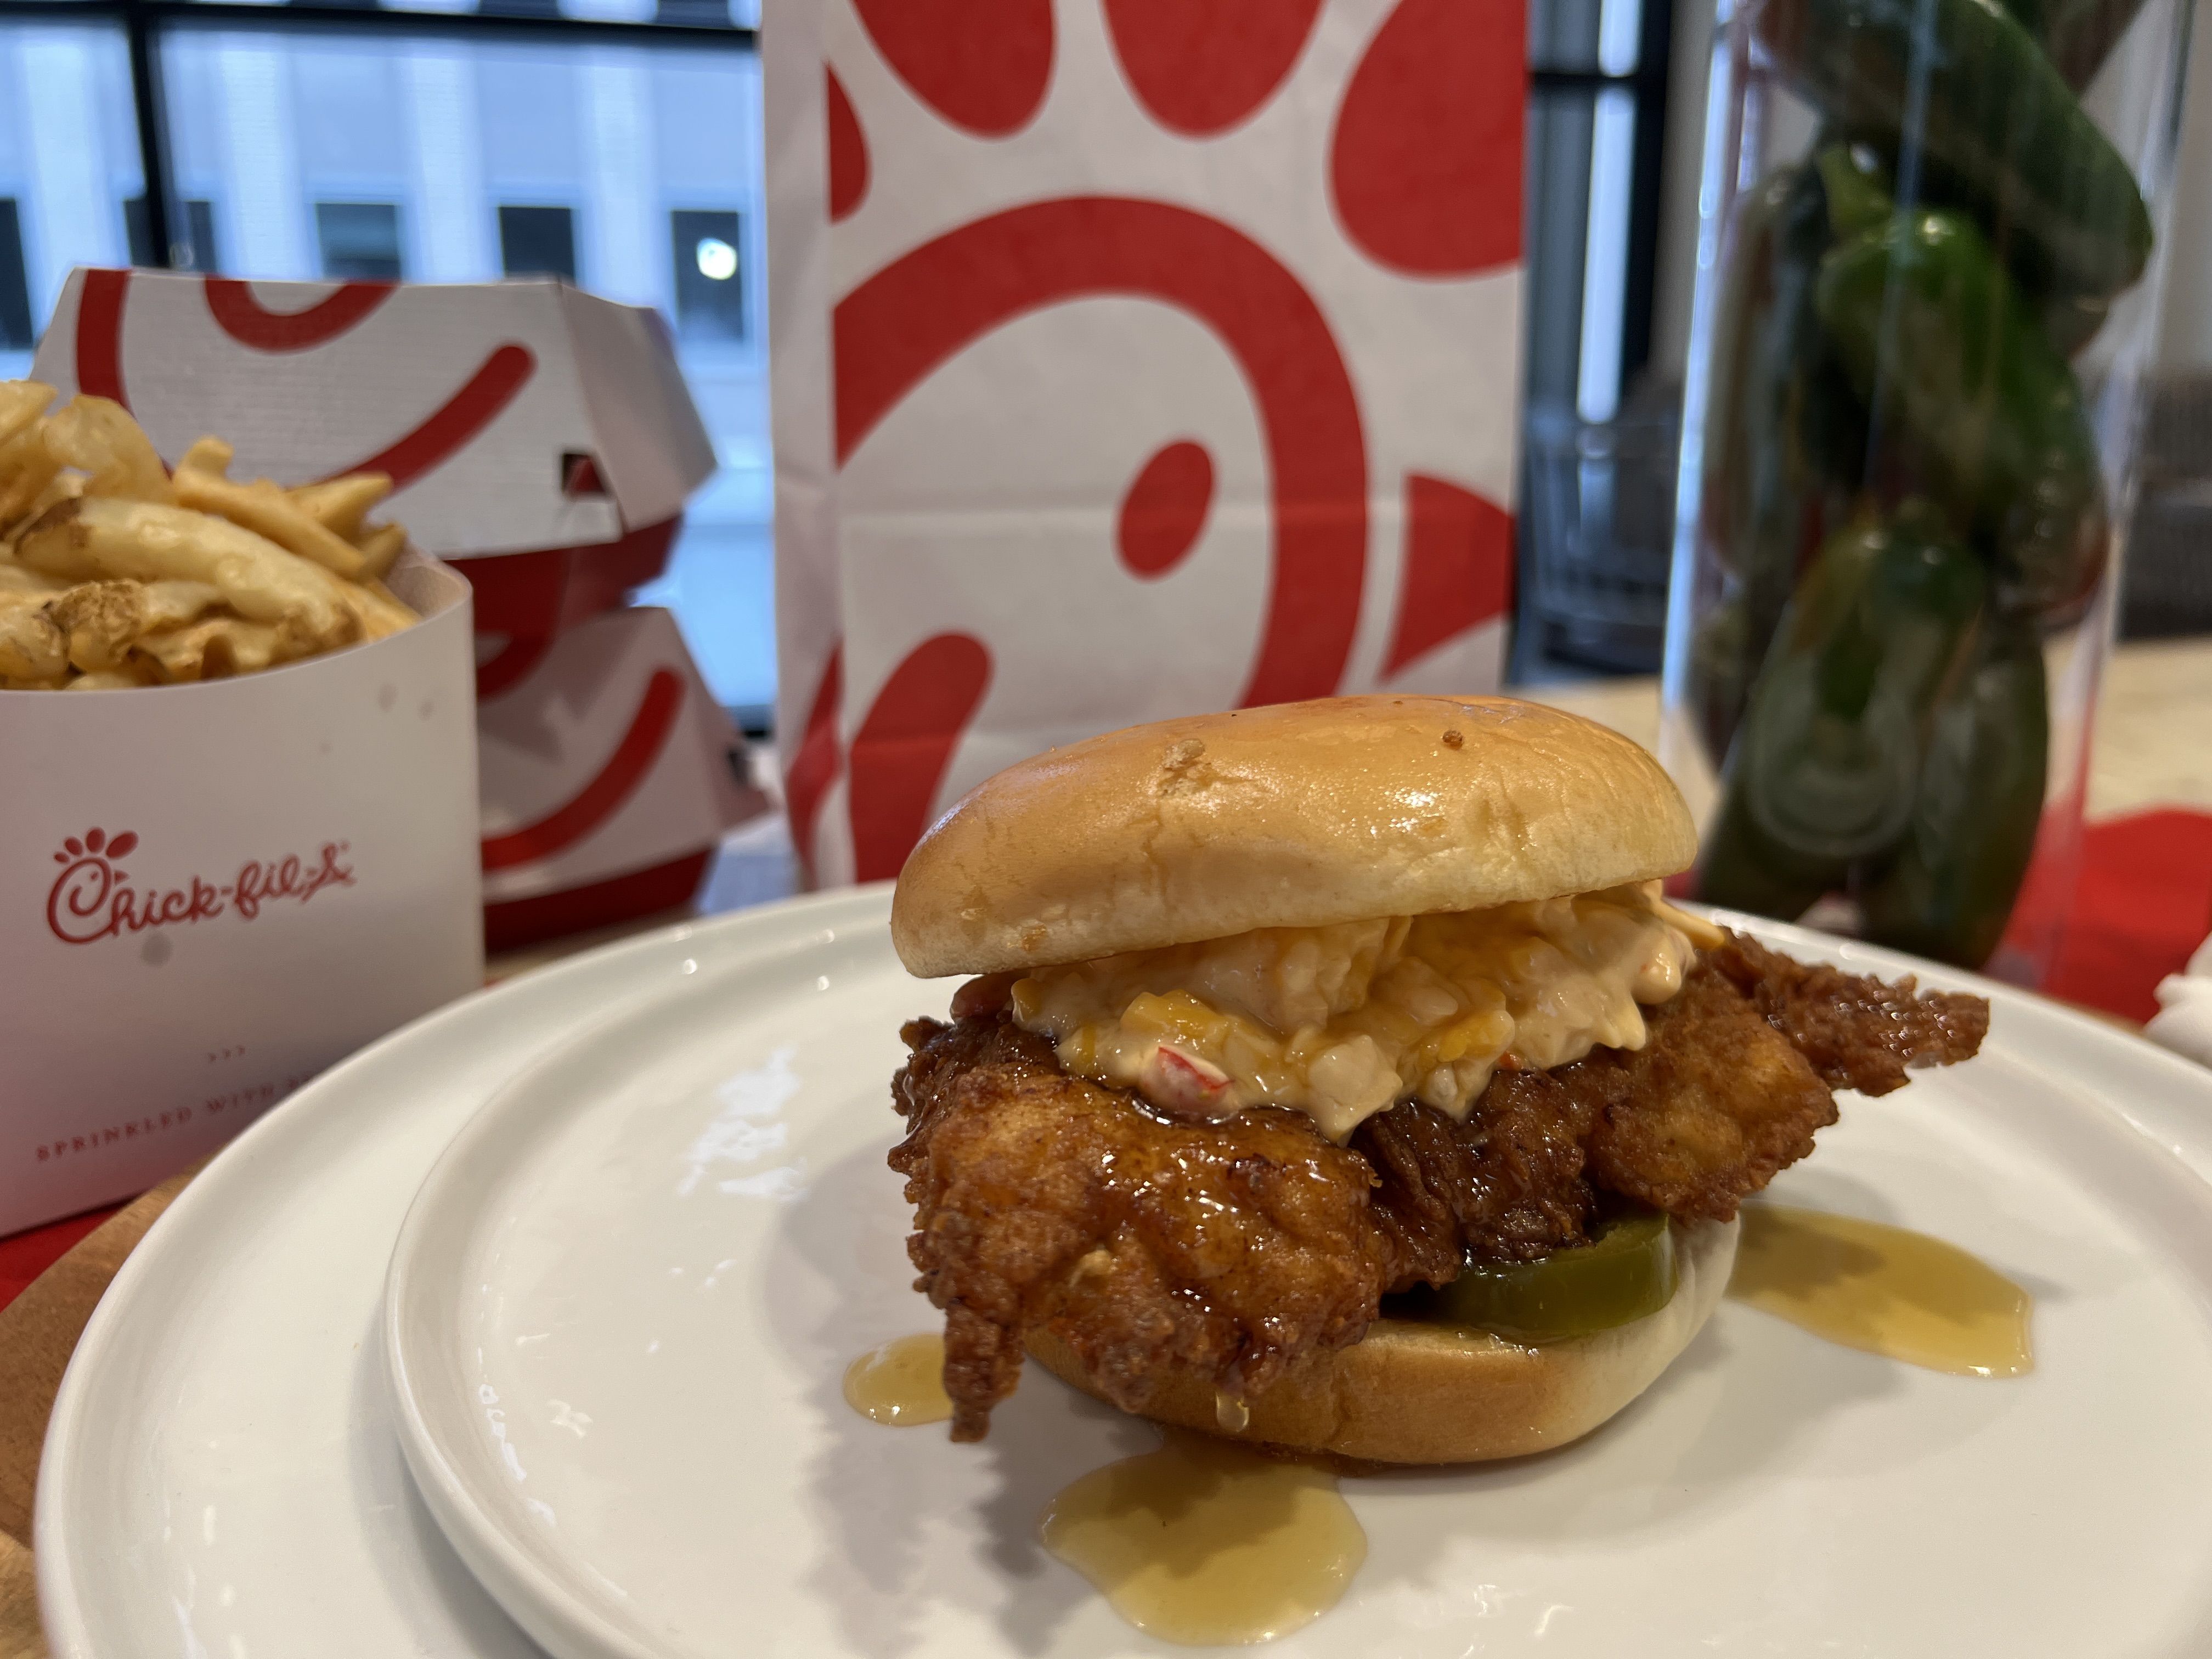 chick fil a chicken strips meal